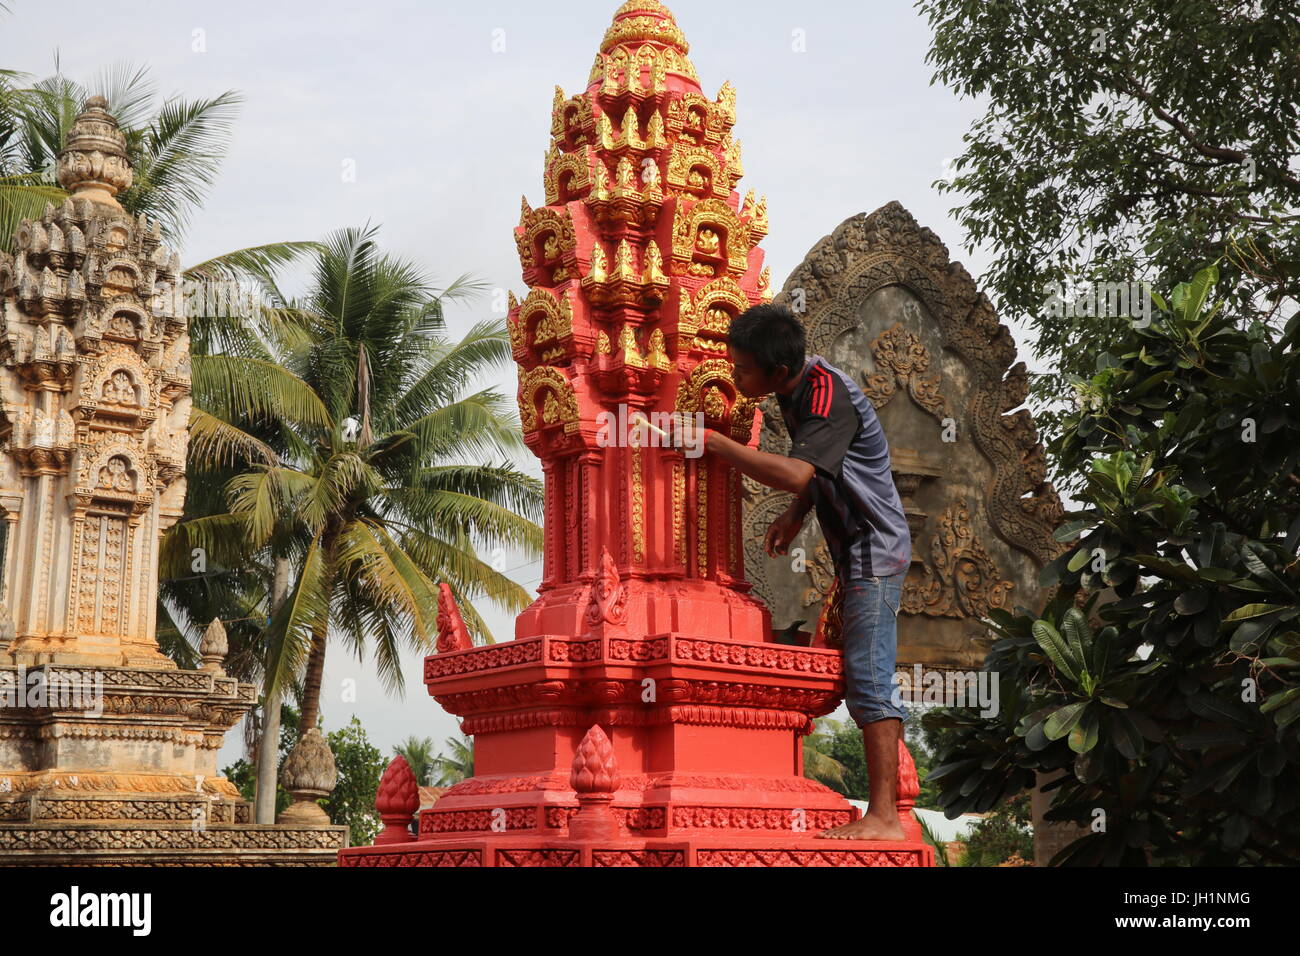 Khmer temple given a fresh coat of paint. Cambodia. Stock Photo